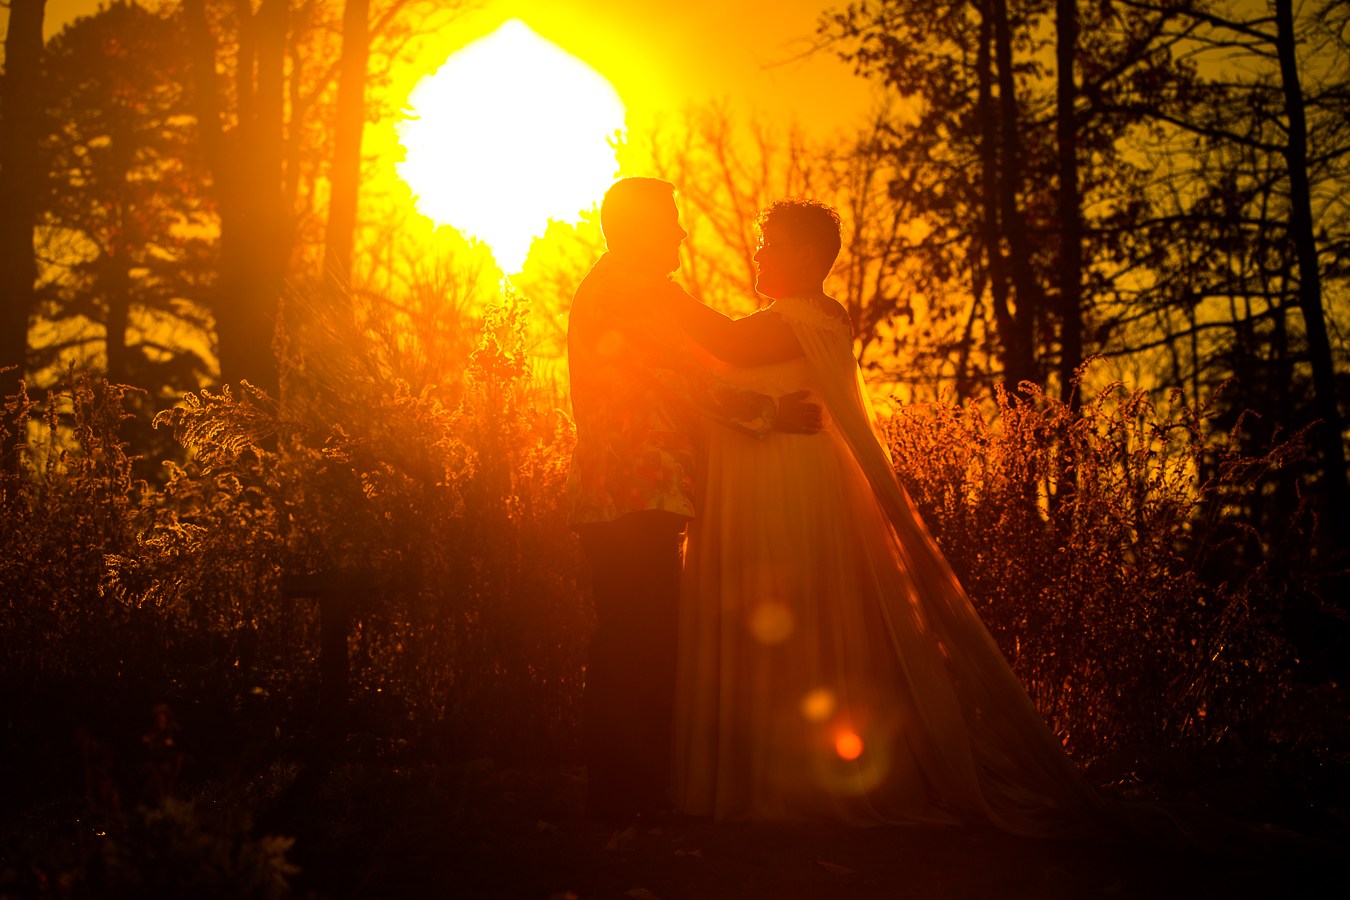 Washington DC LGBTQ Wedding Photographer, lisa rhinehart, captures this warm yellow orange image of the couple embracing each other in the woods as the golden sun sets behind them 